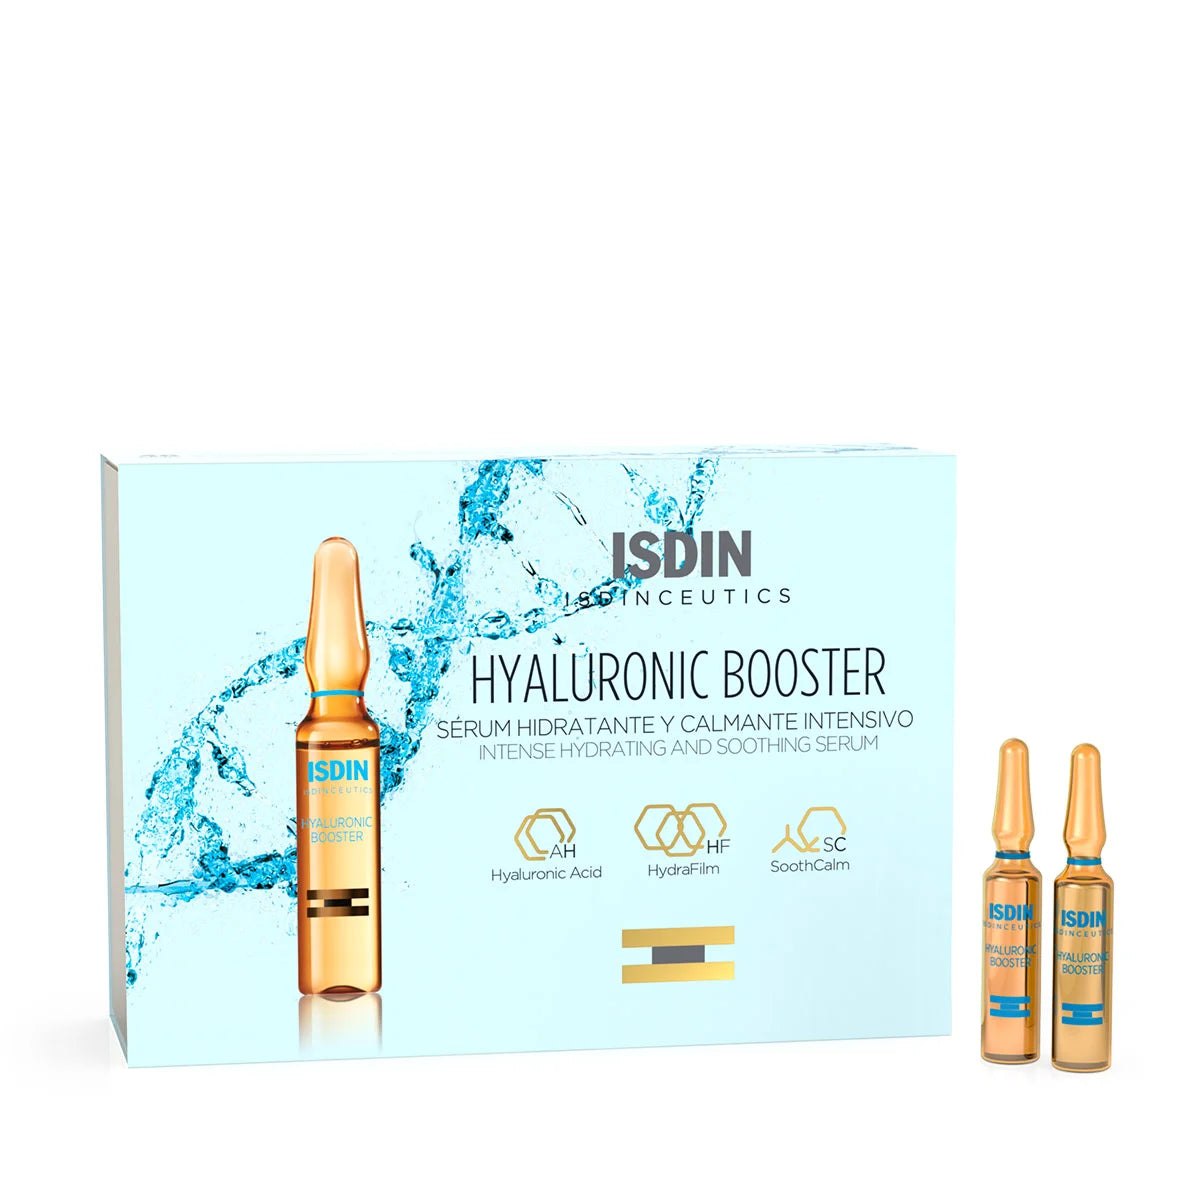 ISDIN HYALURONIC BOOSTER 10UN